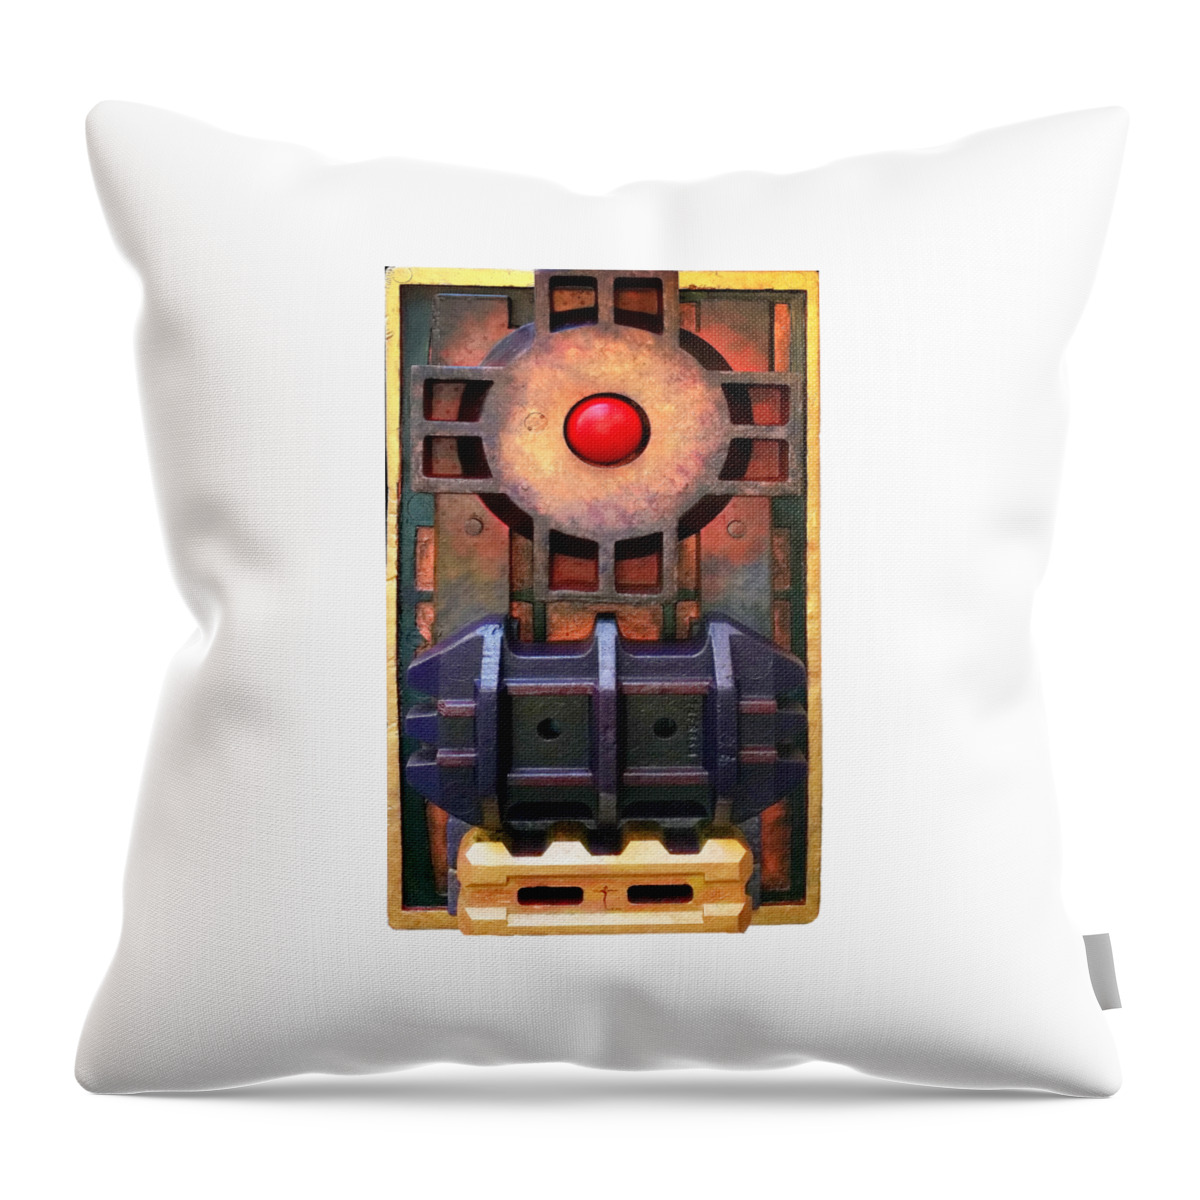  Throw Pillow featuring the painting . by James Lanigan Thompson MFA